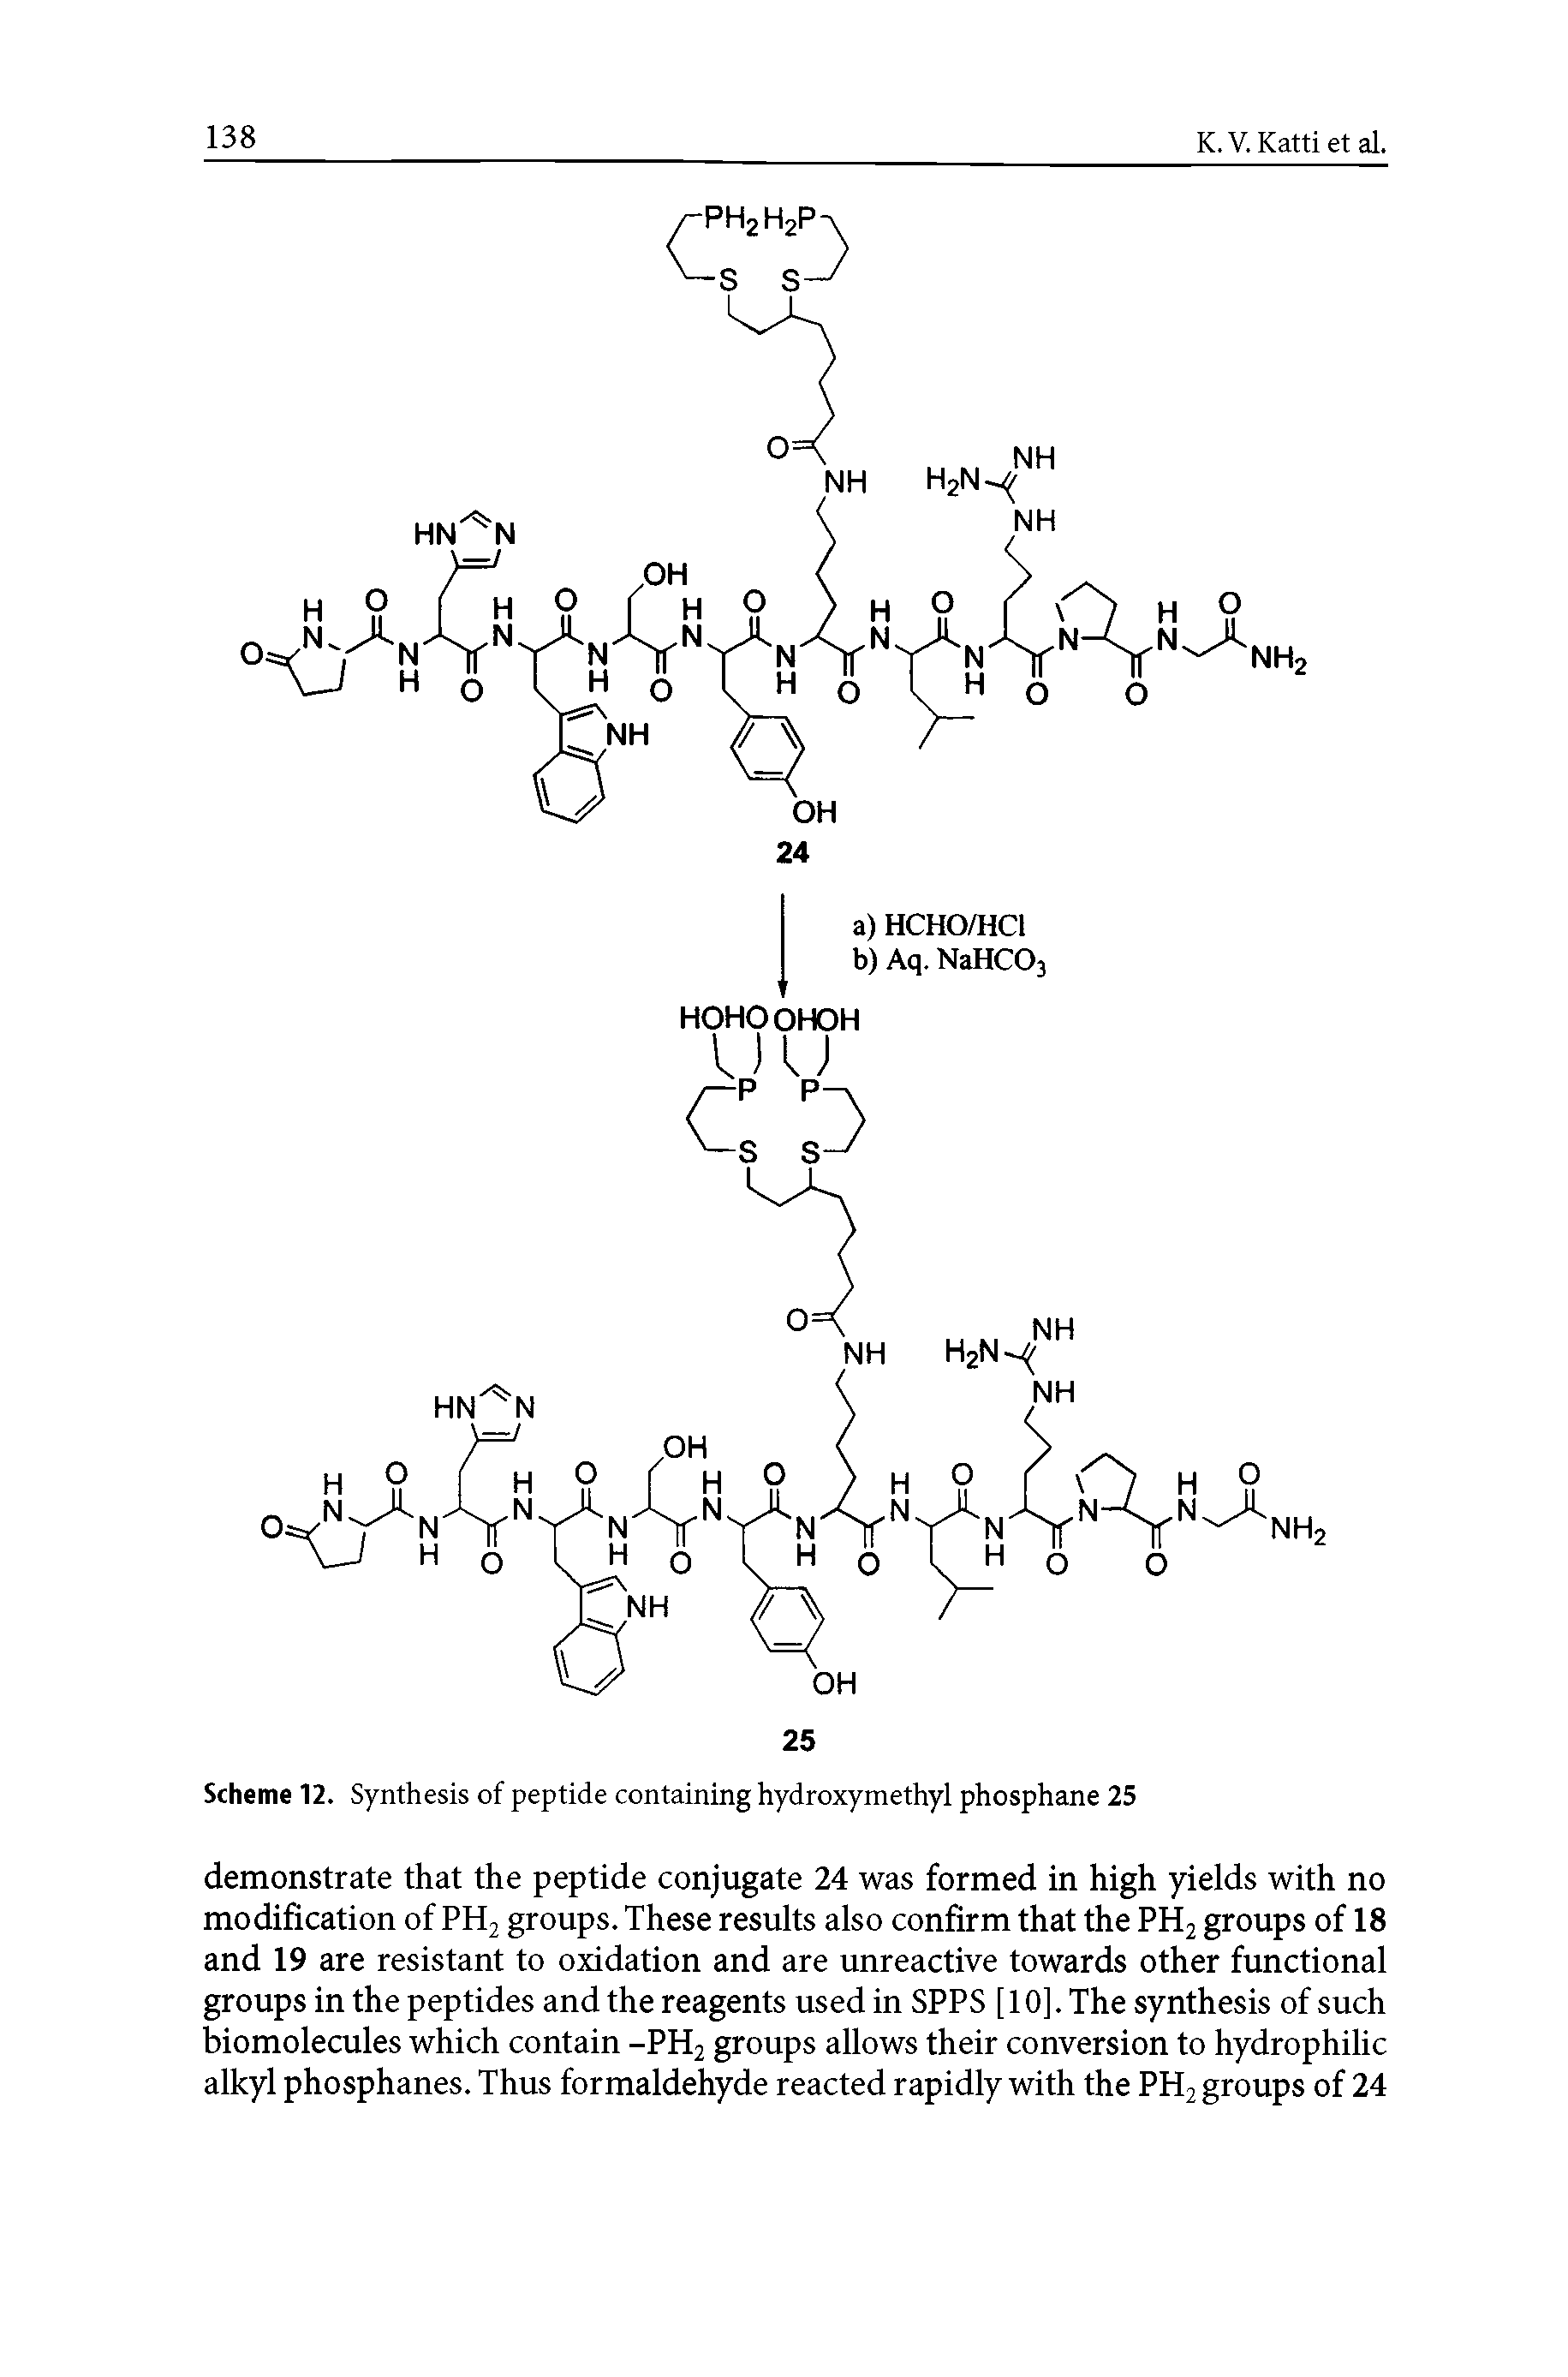 Scheme 12. Synthesis of peptide containing hydroxymethyl phosphane 25...